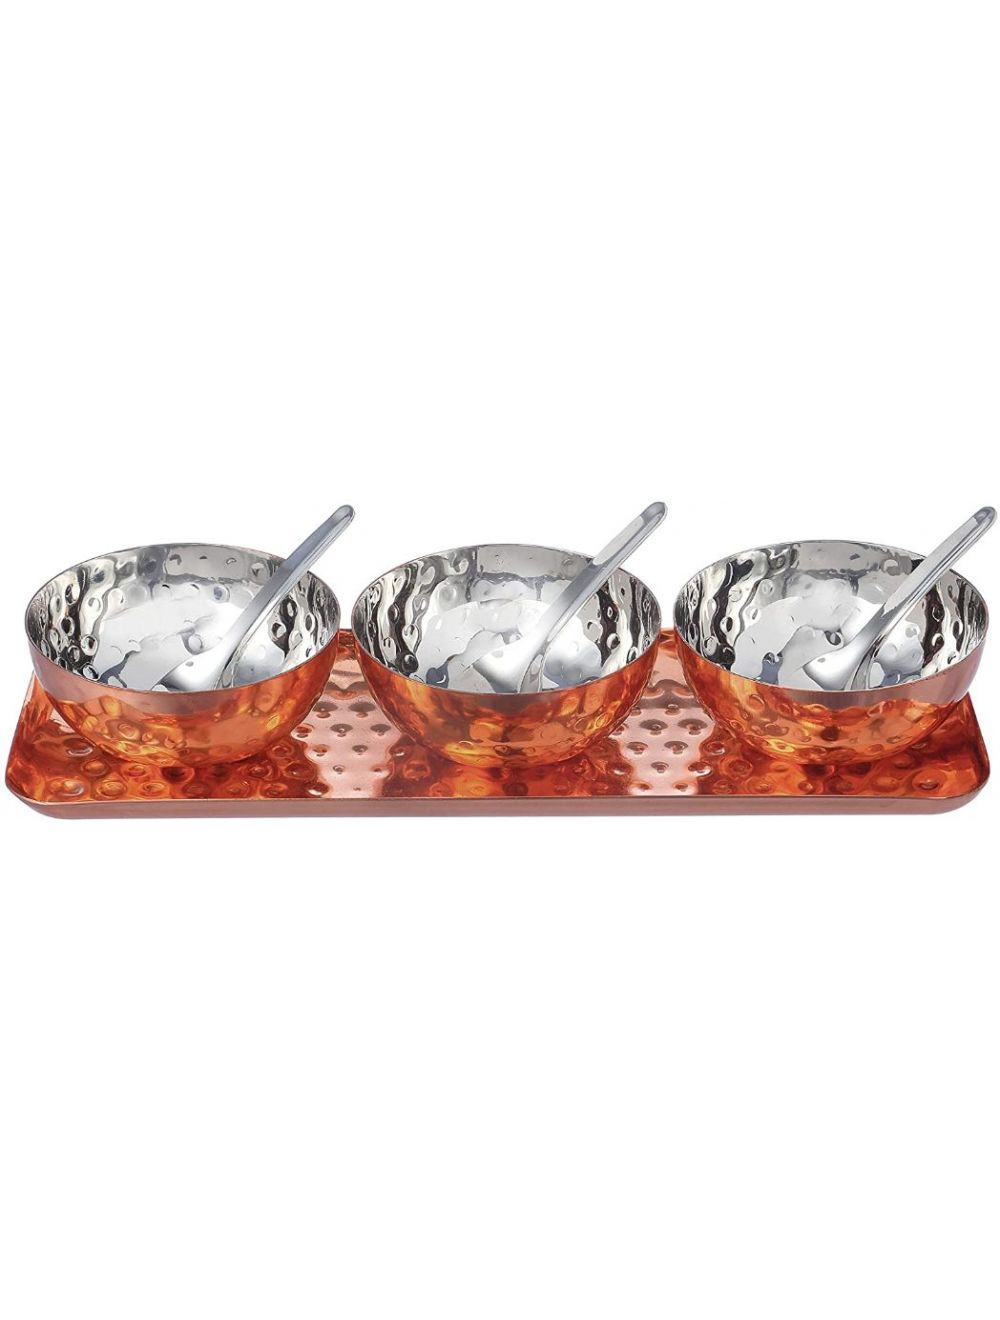 Raj Copper Bowls With Serving Tray And Spoons, RSD007, 7 Pieces